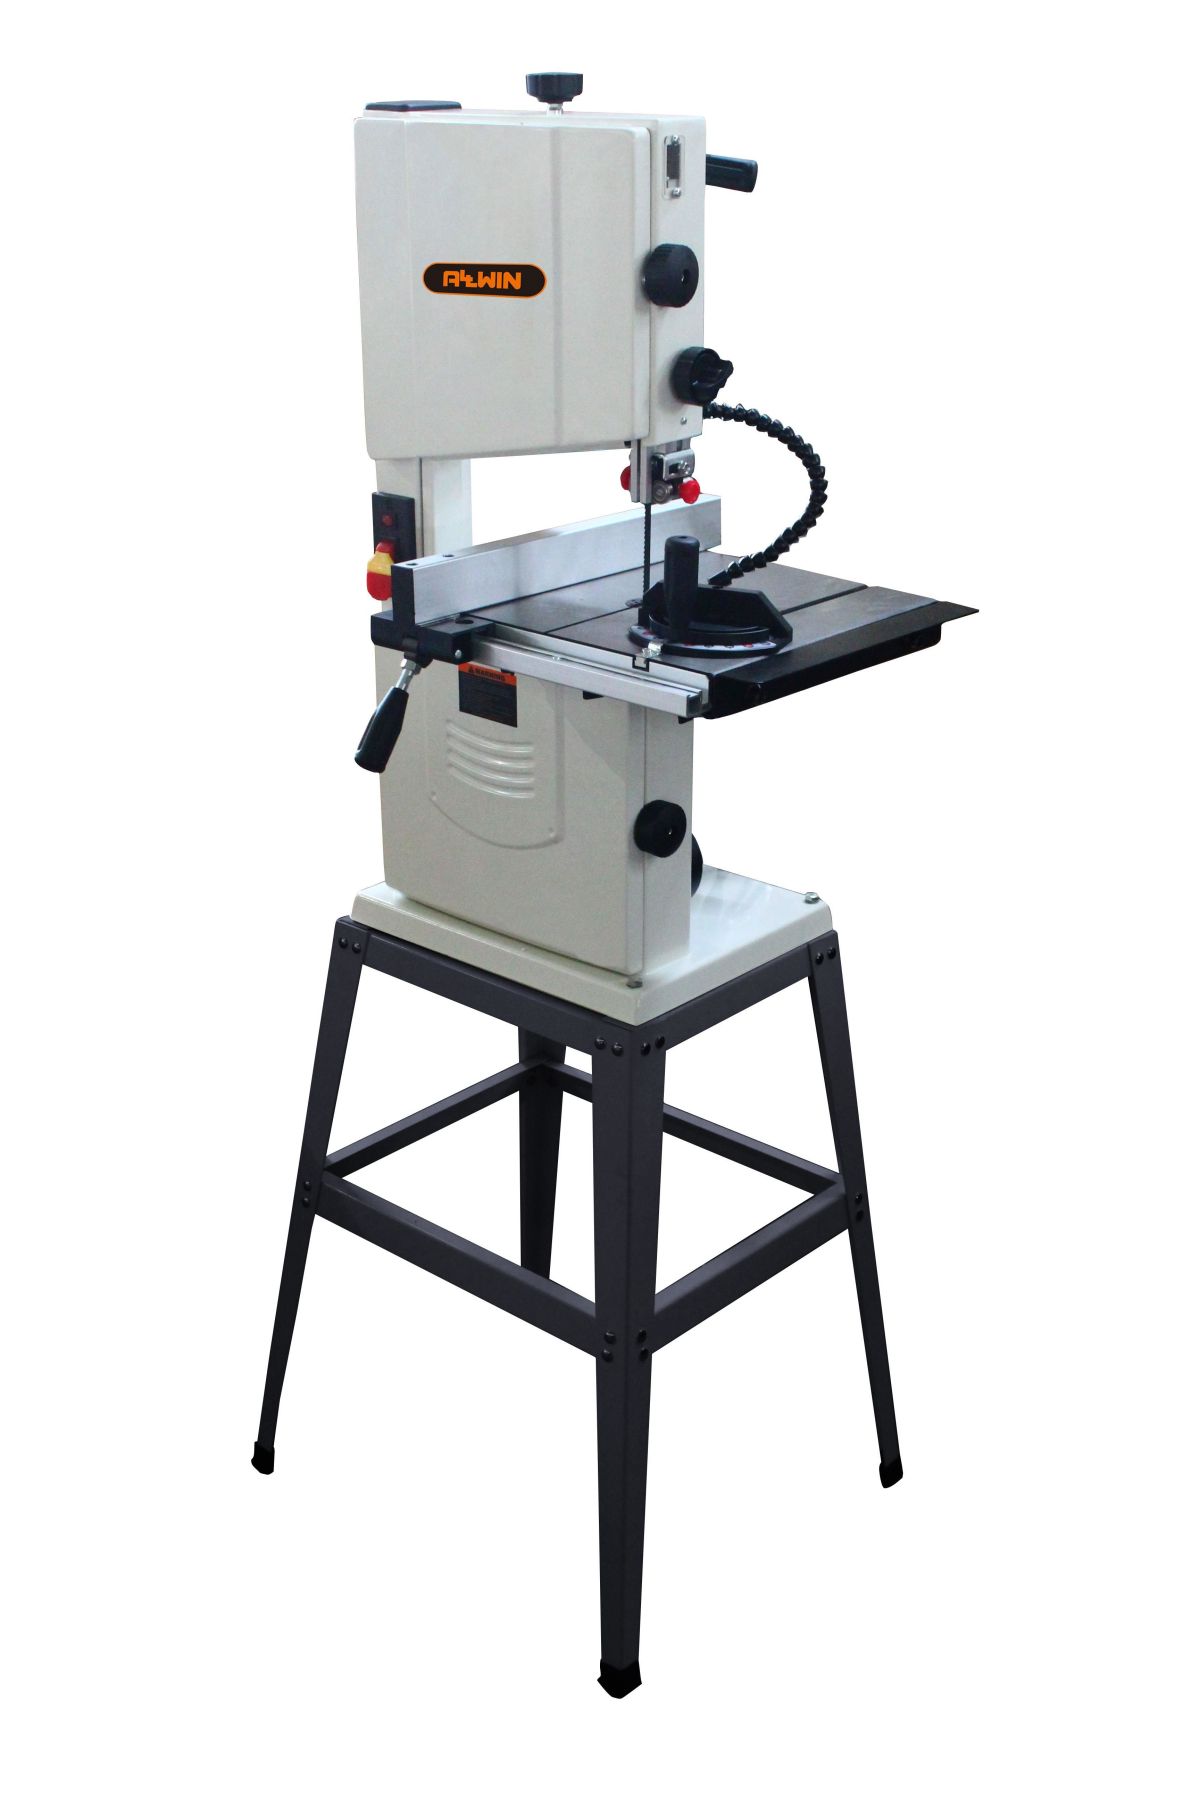 What to look for when purchasing a band saw from  Allwin’s on-line store